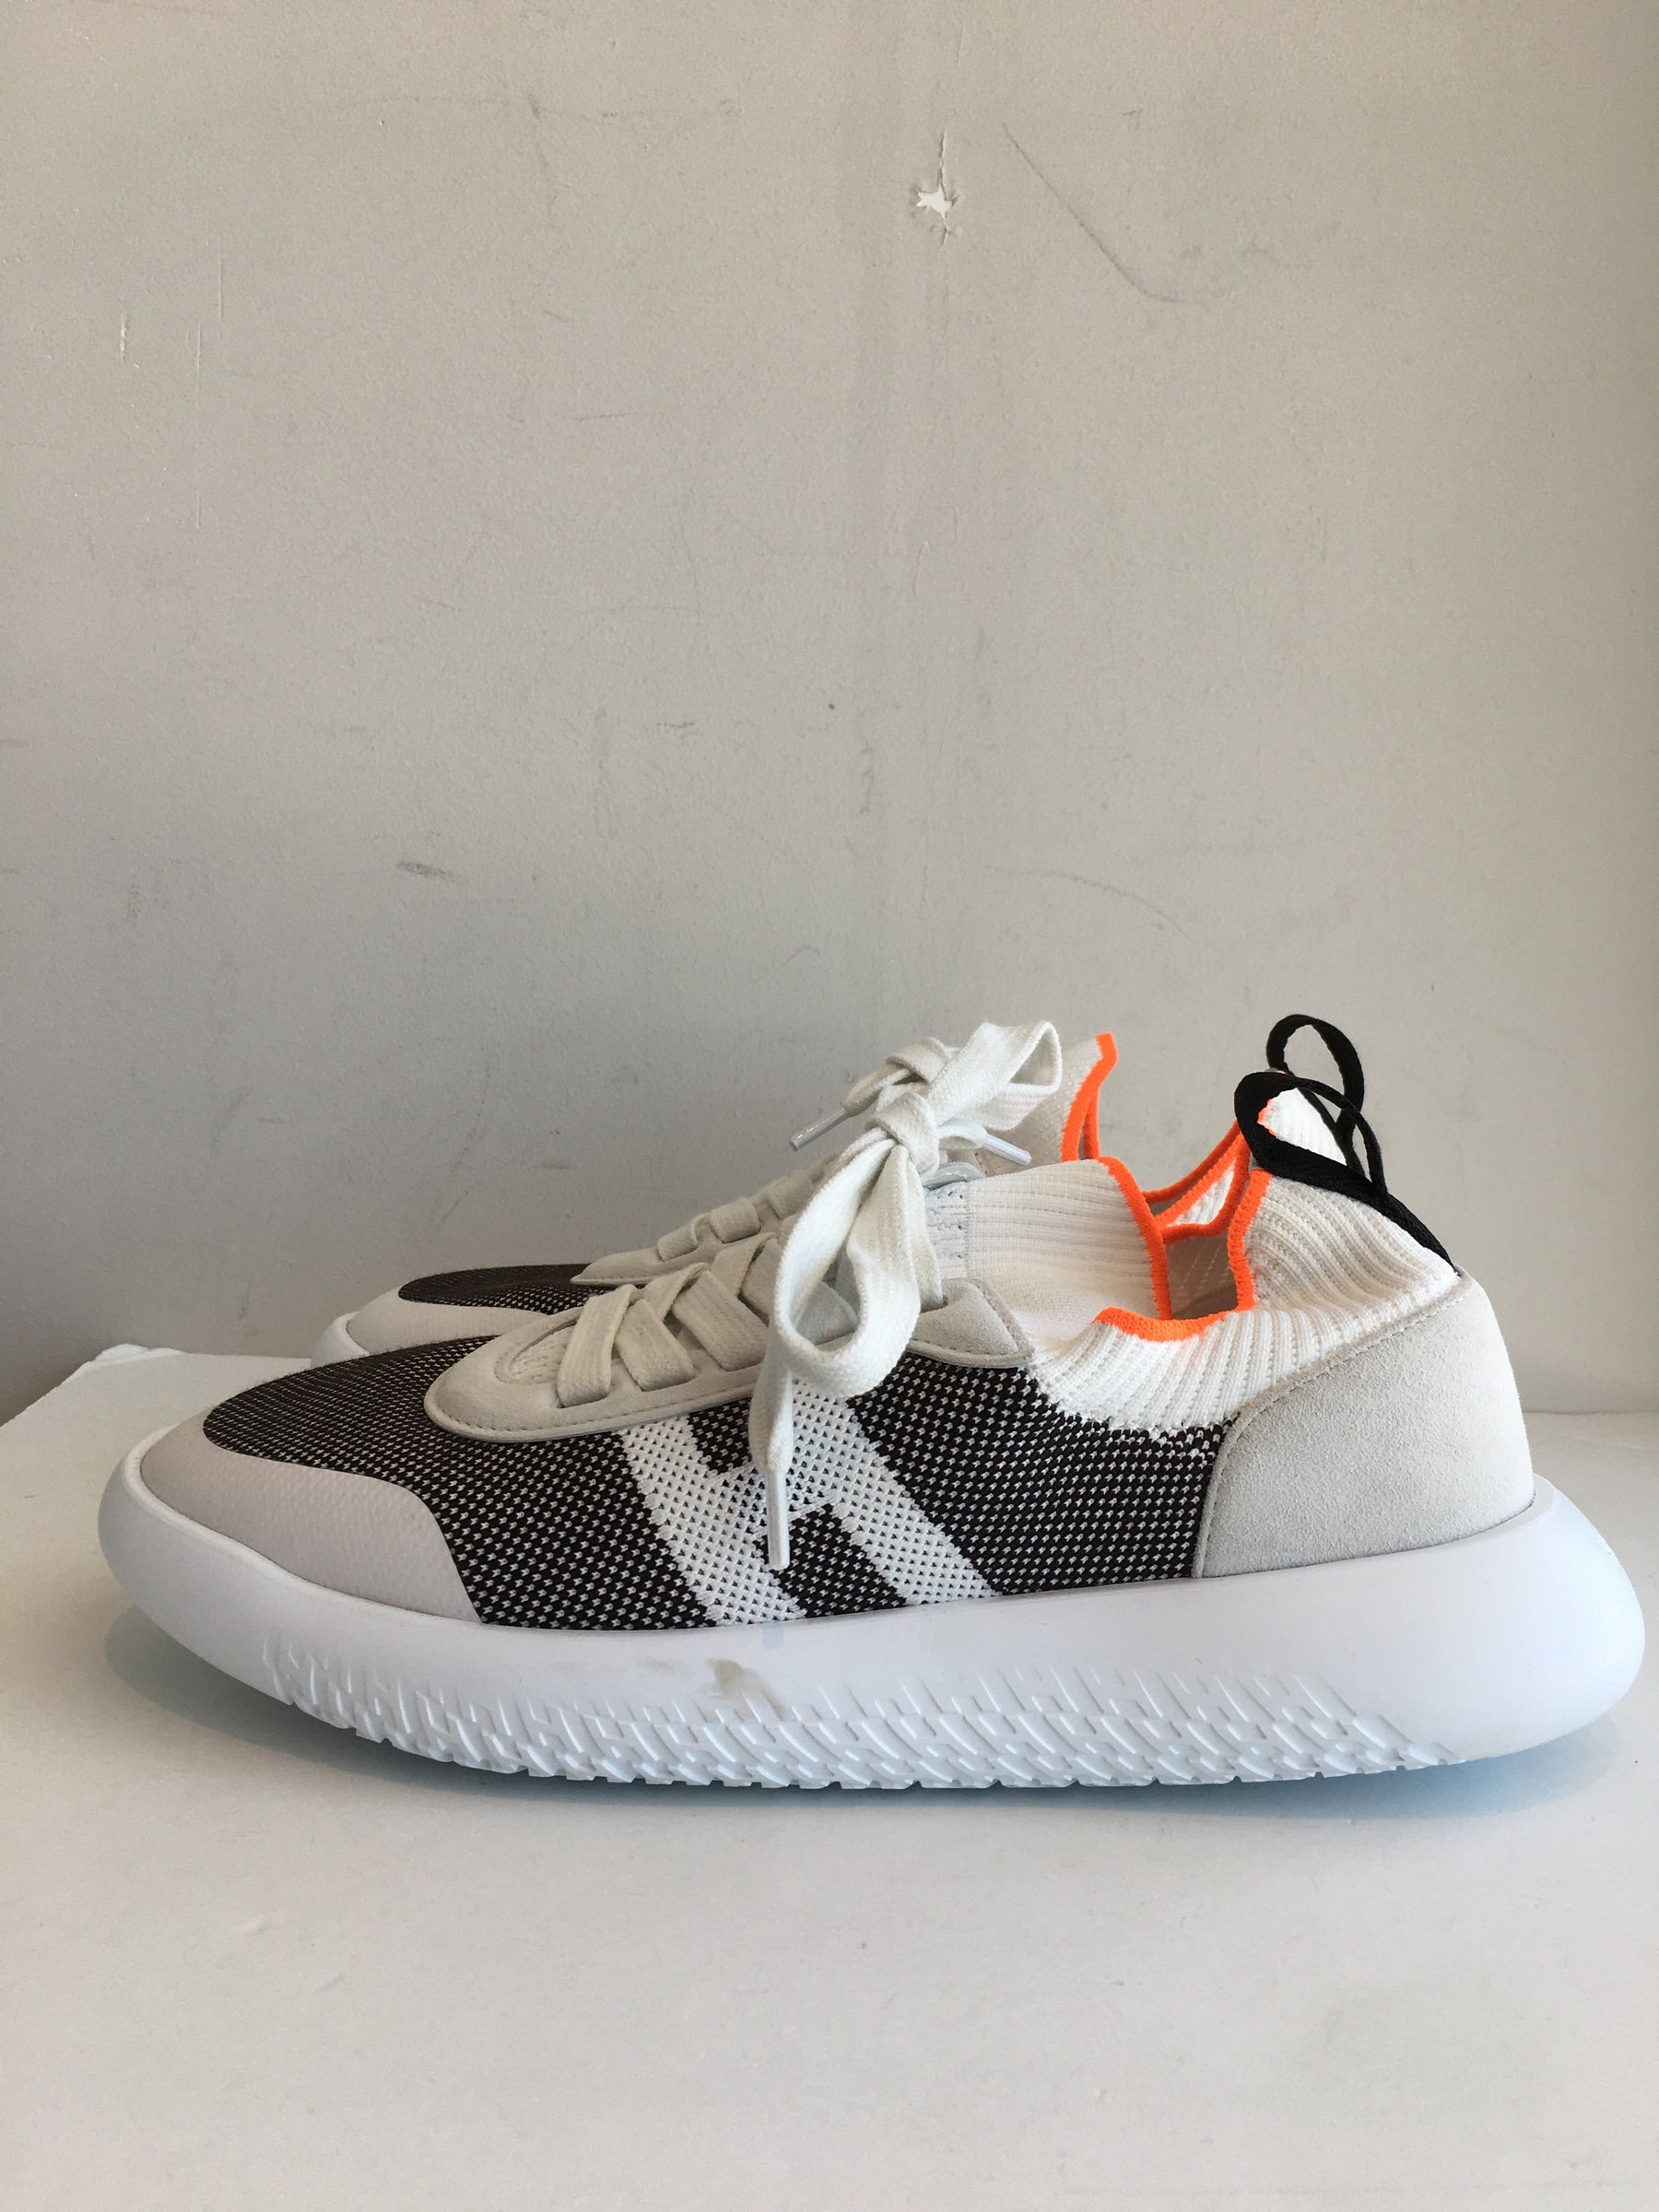 Hermès Crew Running Sneakers in White and Orange Side